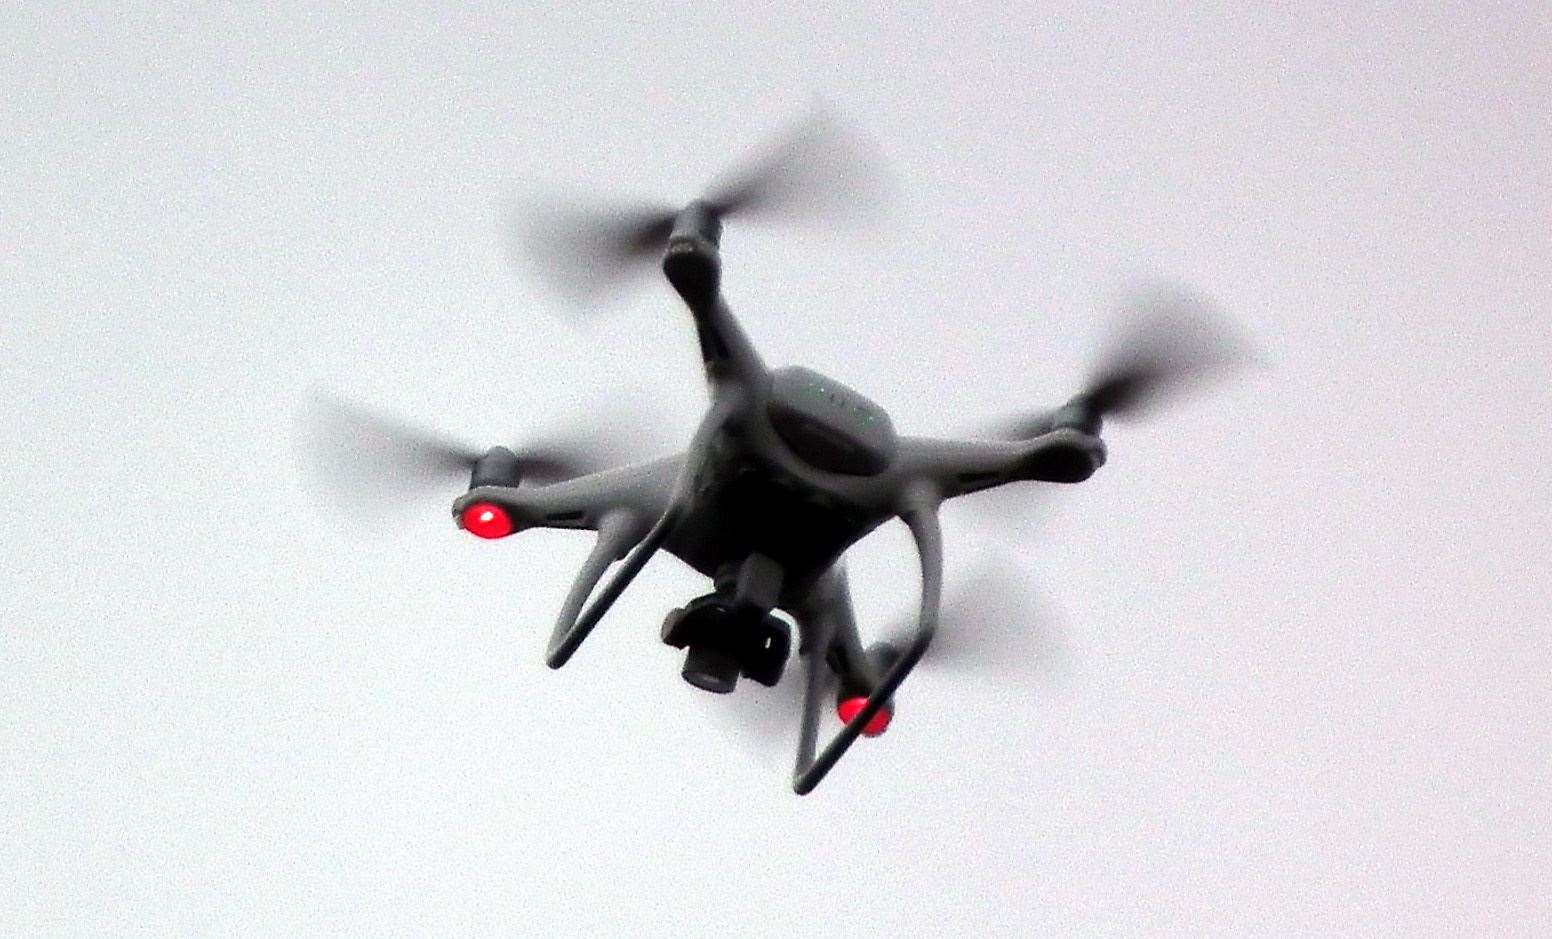 Drones are being used to track migrants. Picture: Suffolk Police